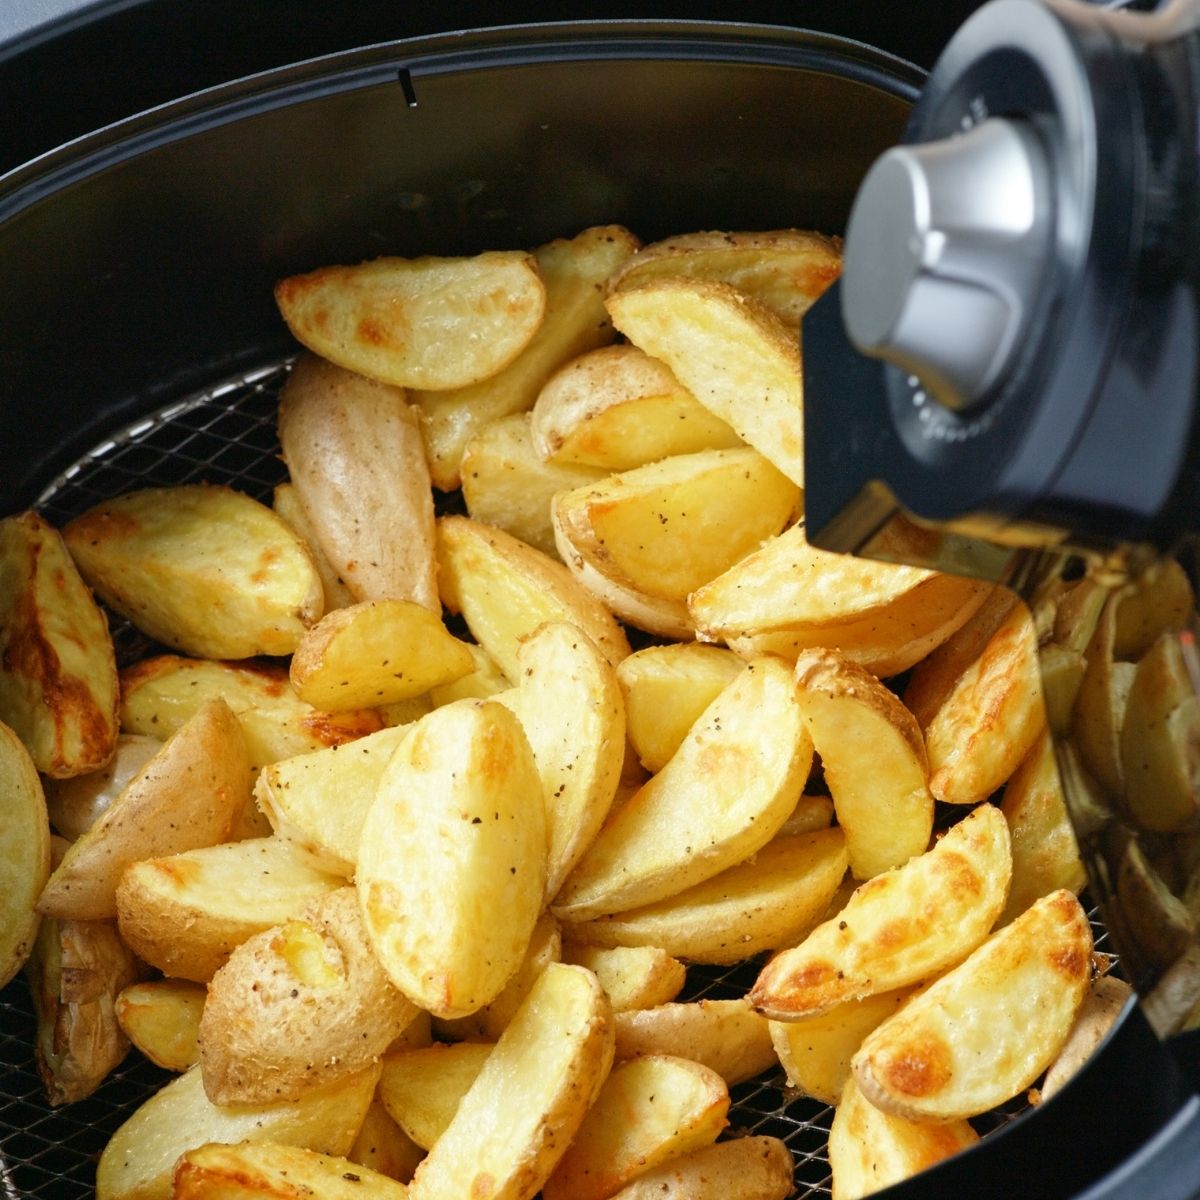 20 Easy Air Fryer Recipes For Kids - FamilyEducation